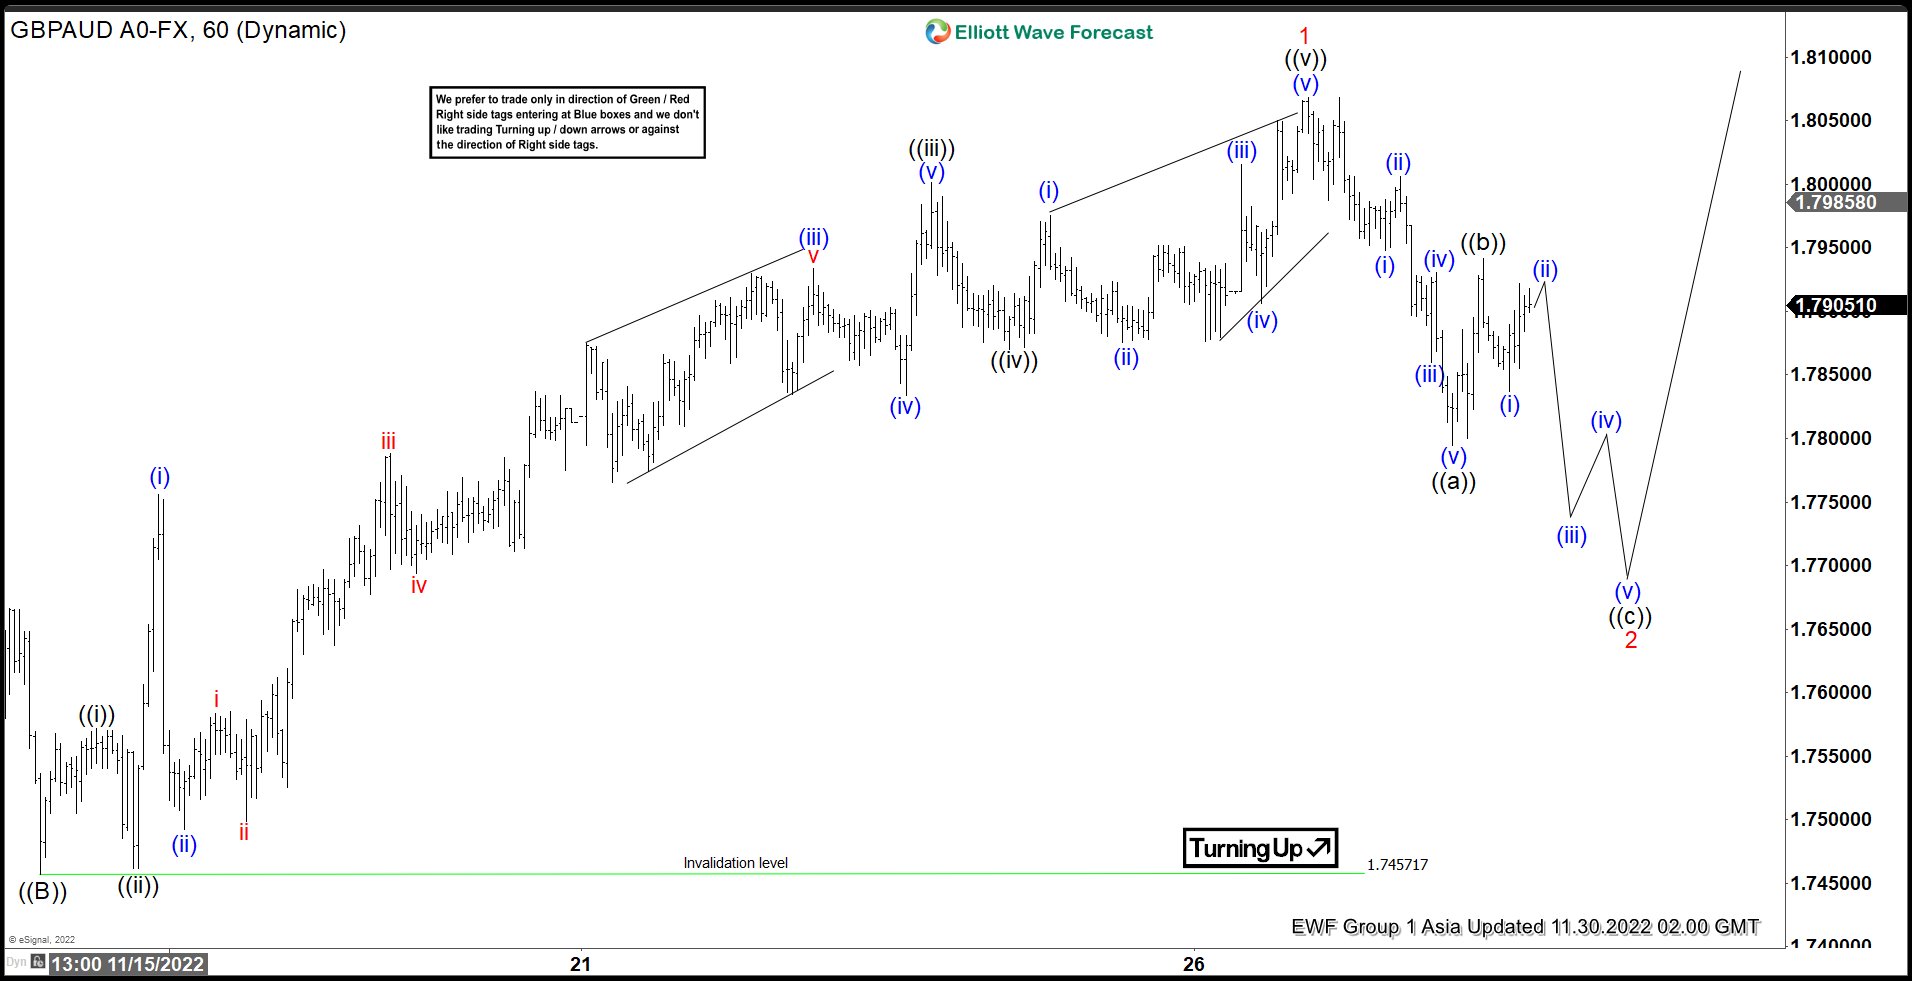 Elliott Wave View: Larger Degree Rally in GBPAUD